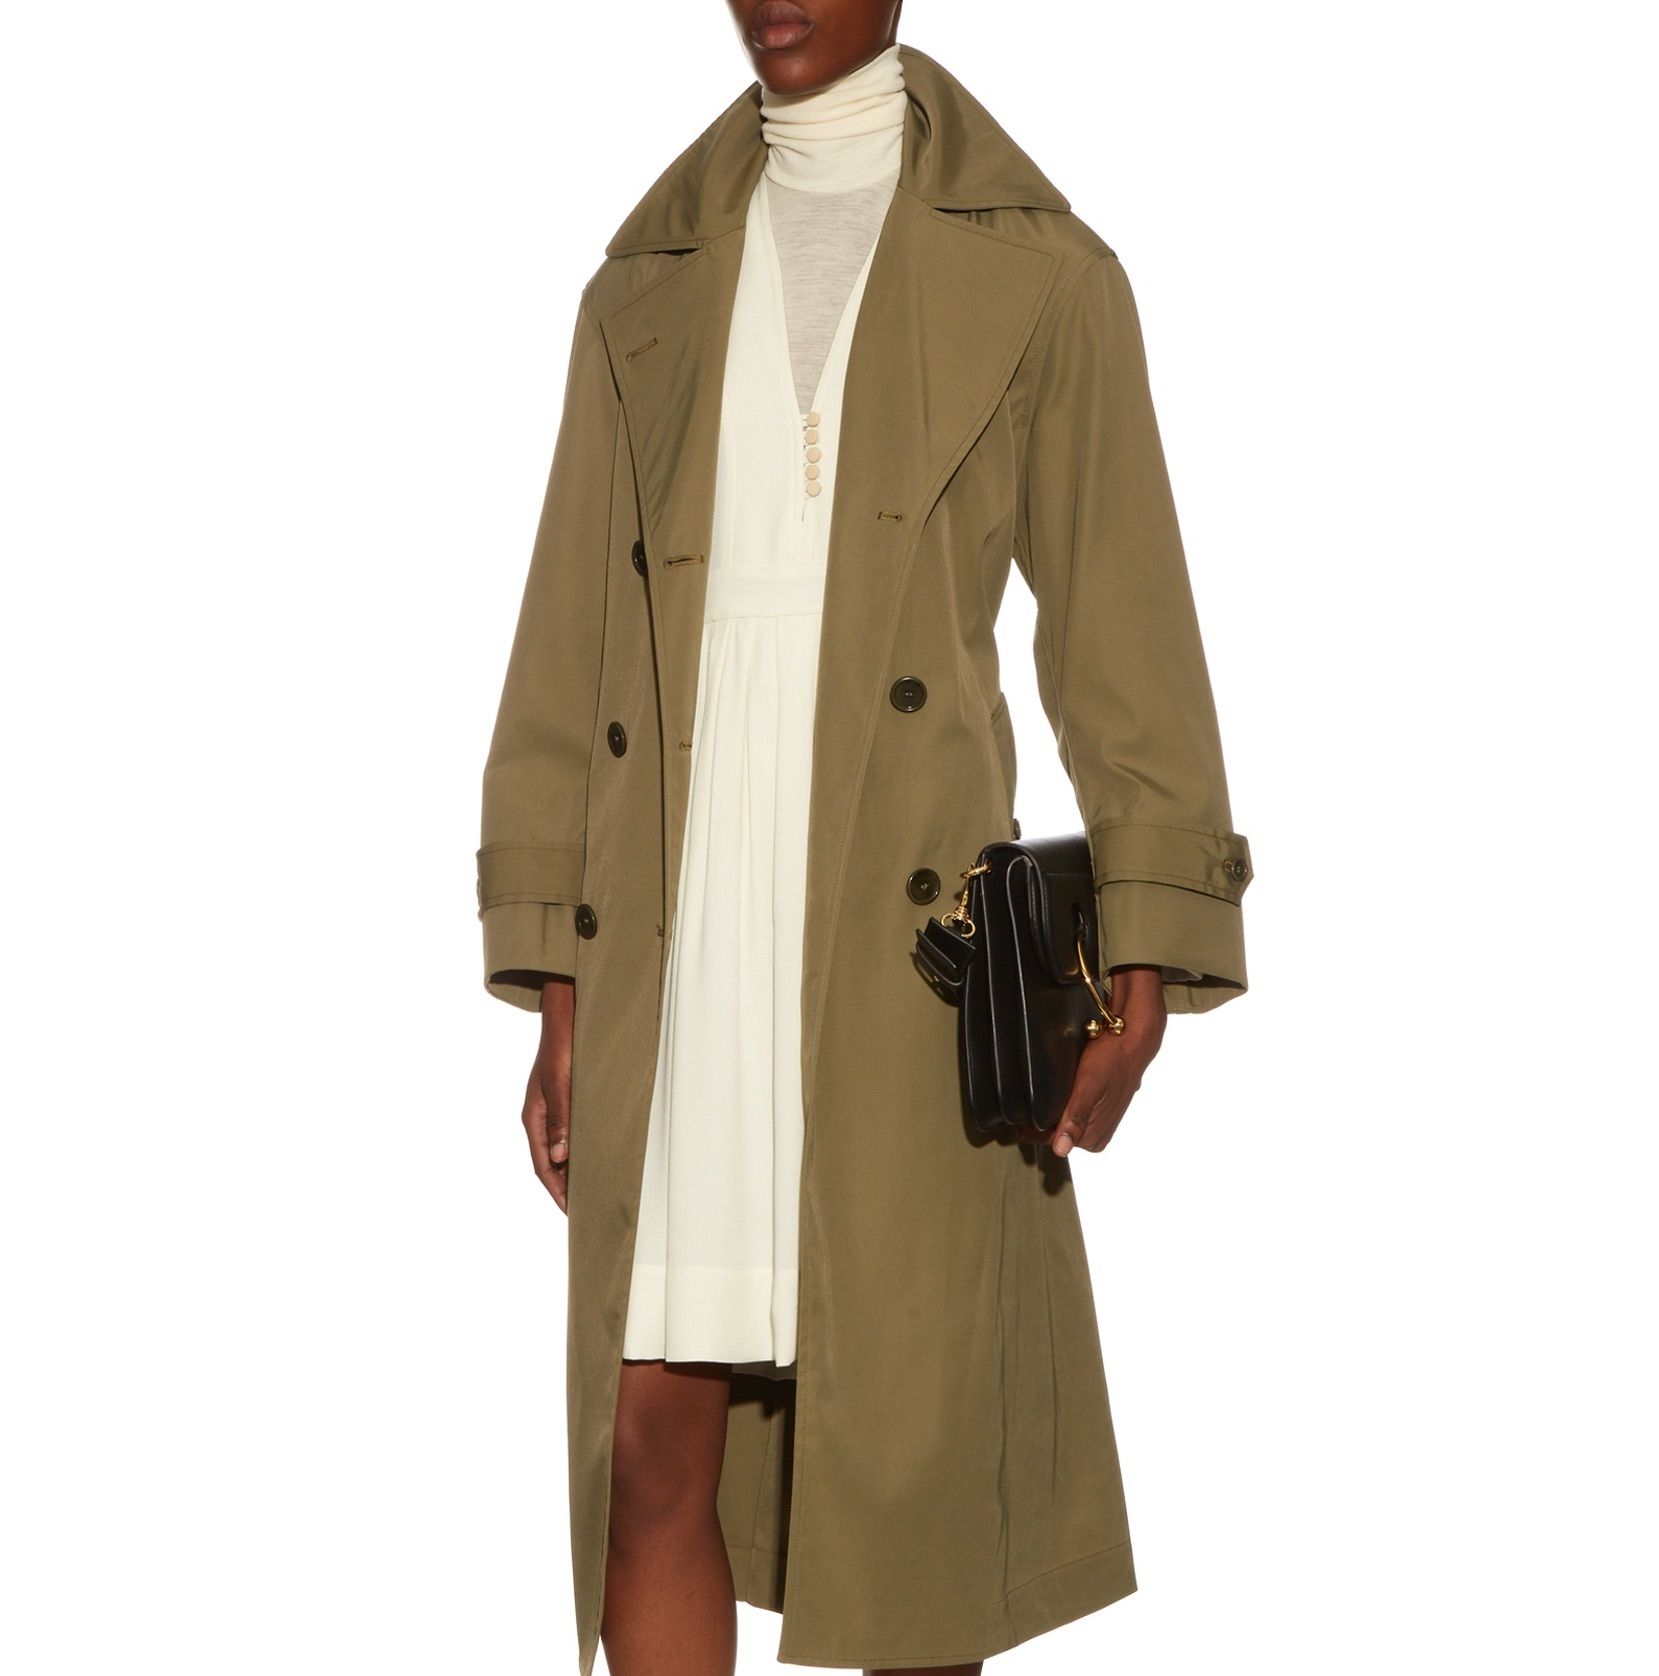 10 chic trench coats for battling cold weather | Lifestyle Asia